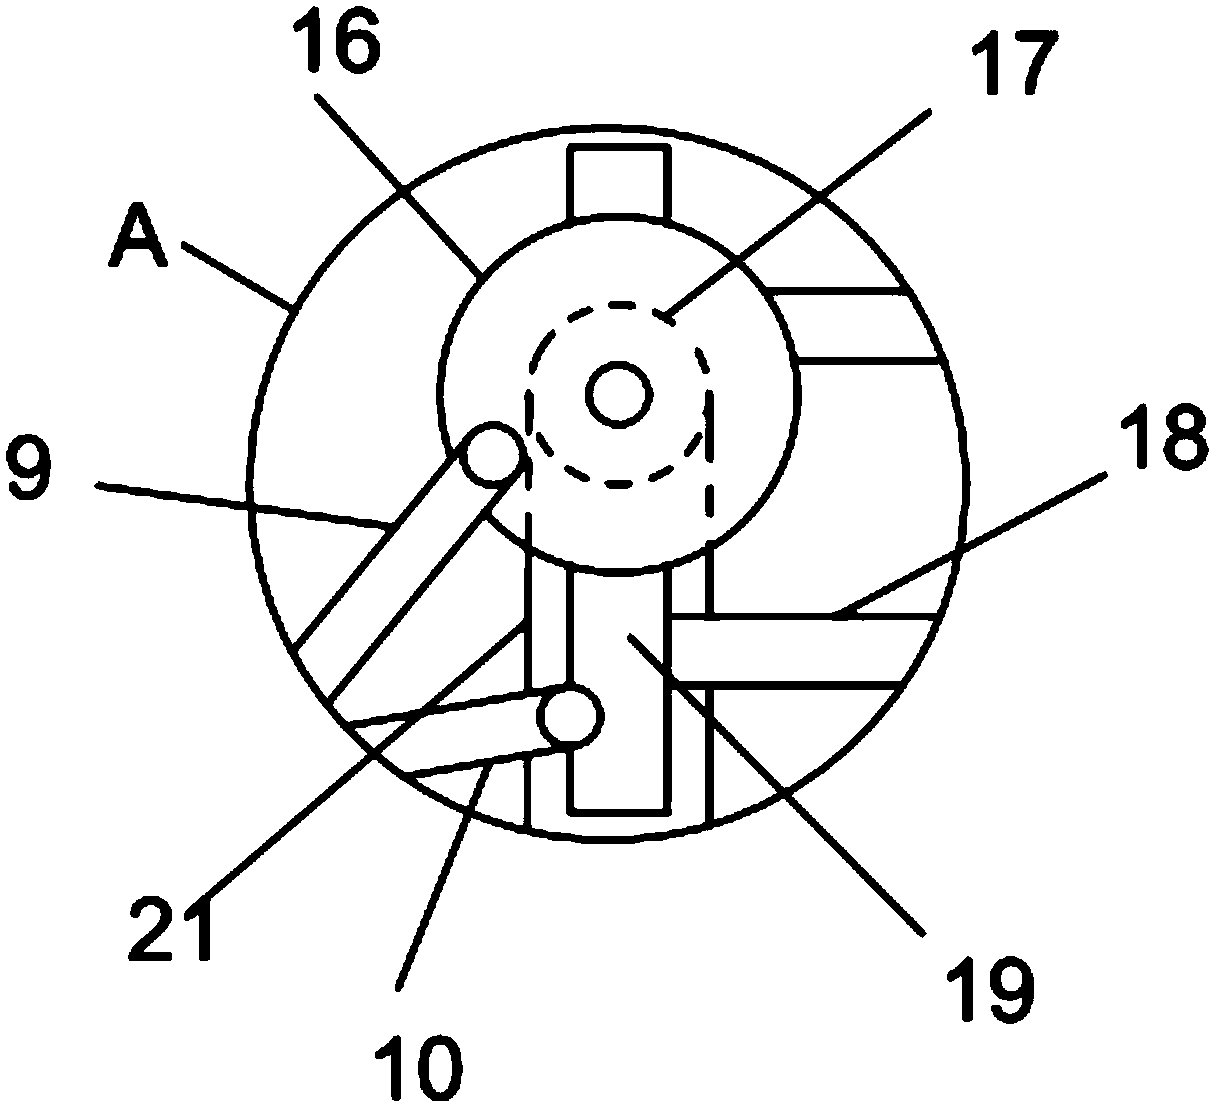 Sunflower seed stir-frying and drying device for agricultural production